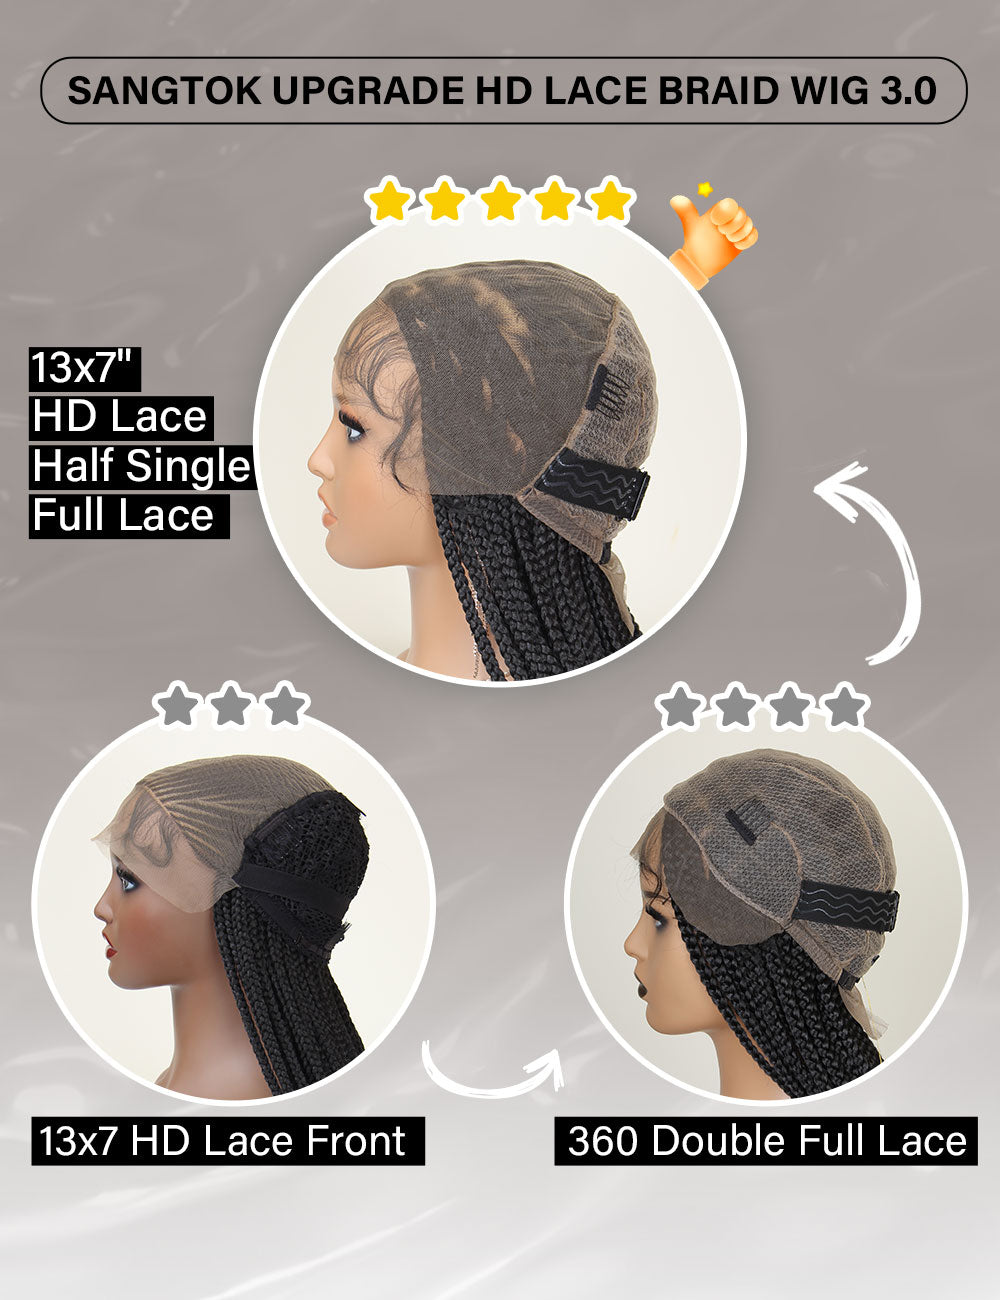 30 French Curl Wigs 13x7 Goddess Braided Lace Front Wigs for Black Woman –  Sangtok